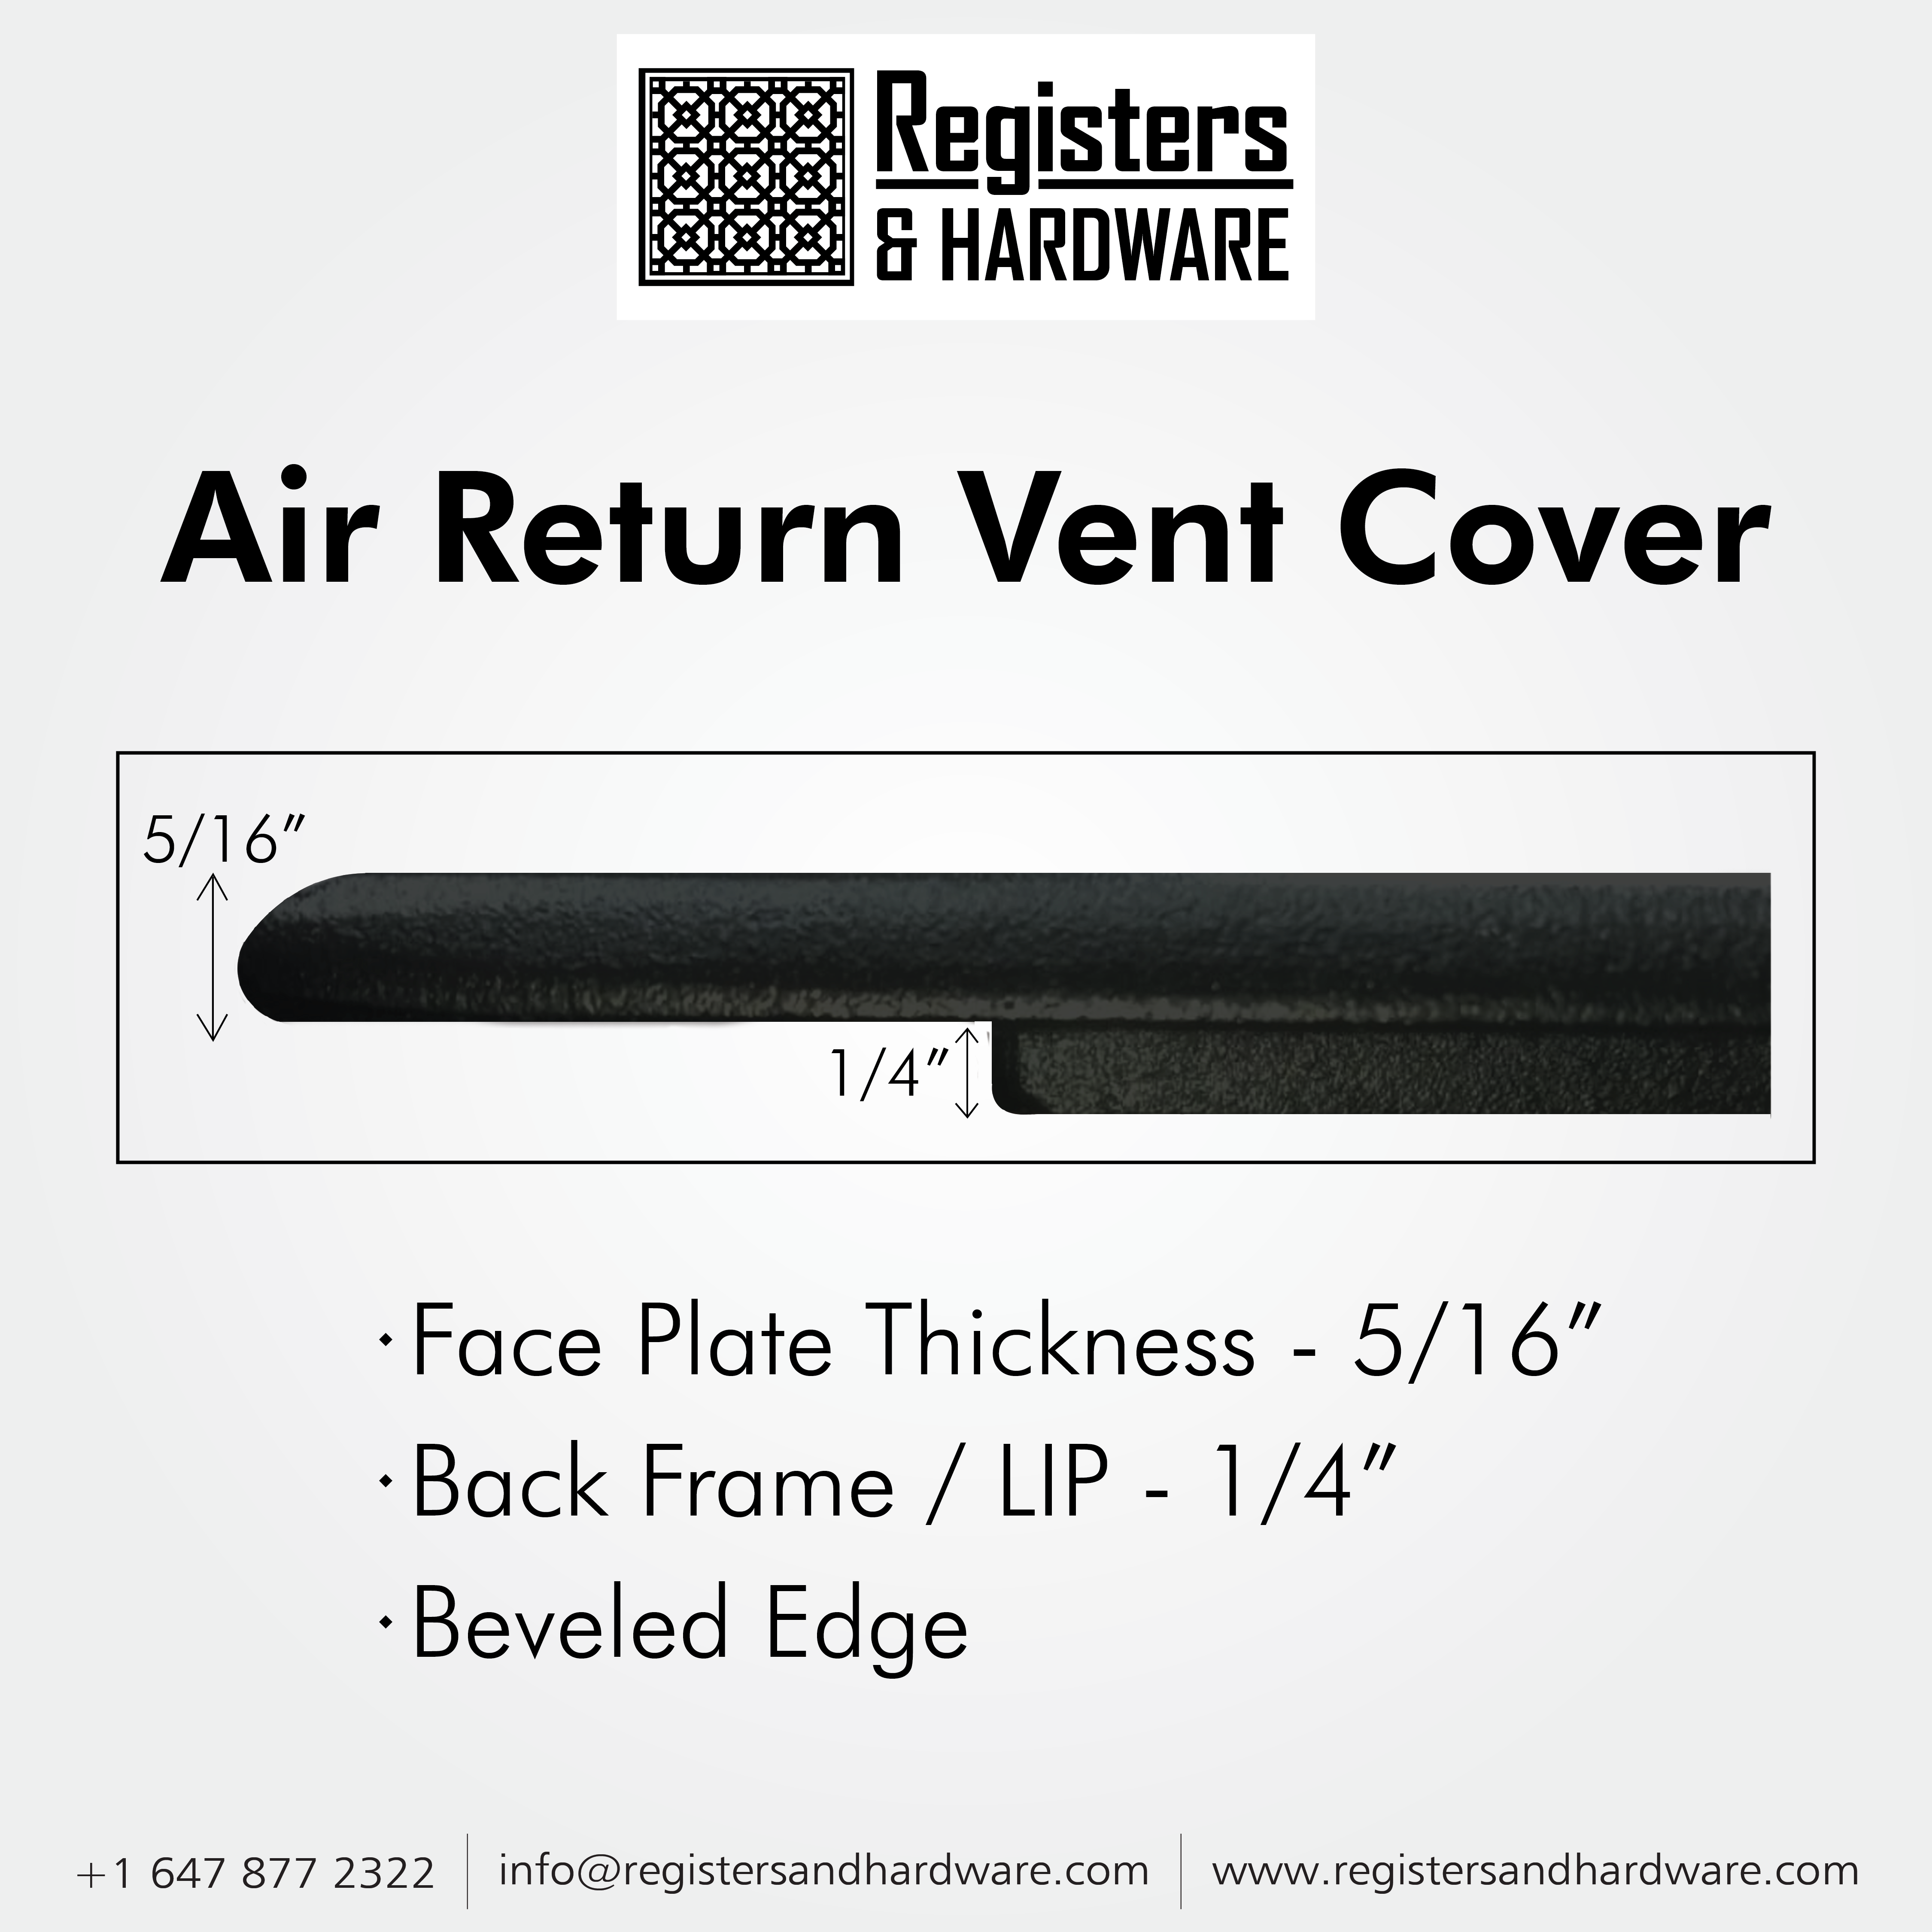 Achtek AIR RETURN 10"x18" Duct Opening (Overall Size 12"x20") | Heavy Cast Aluminum Air Grille HVAC Duct || Powder Coated